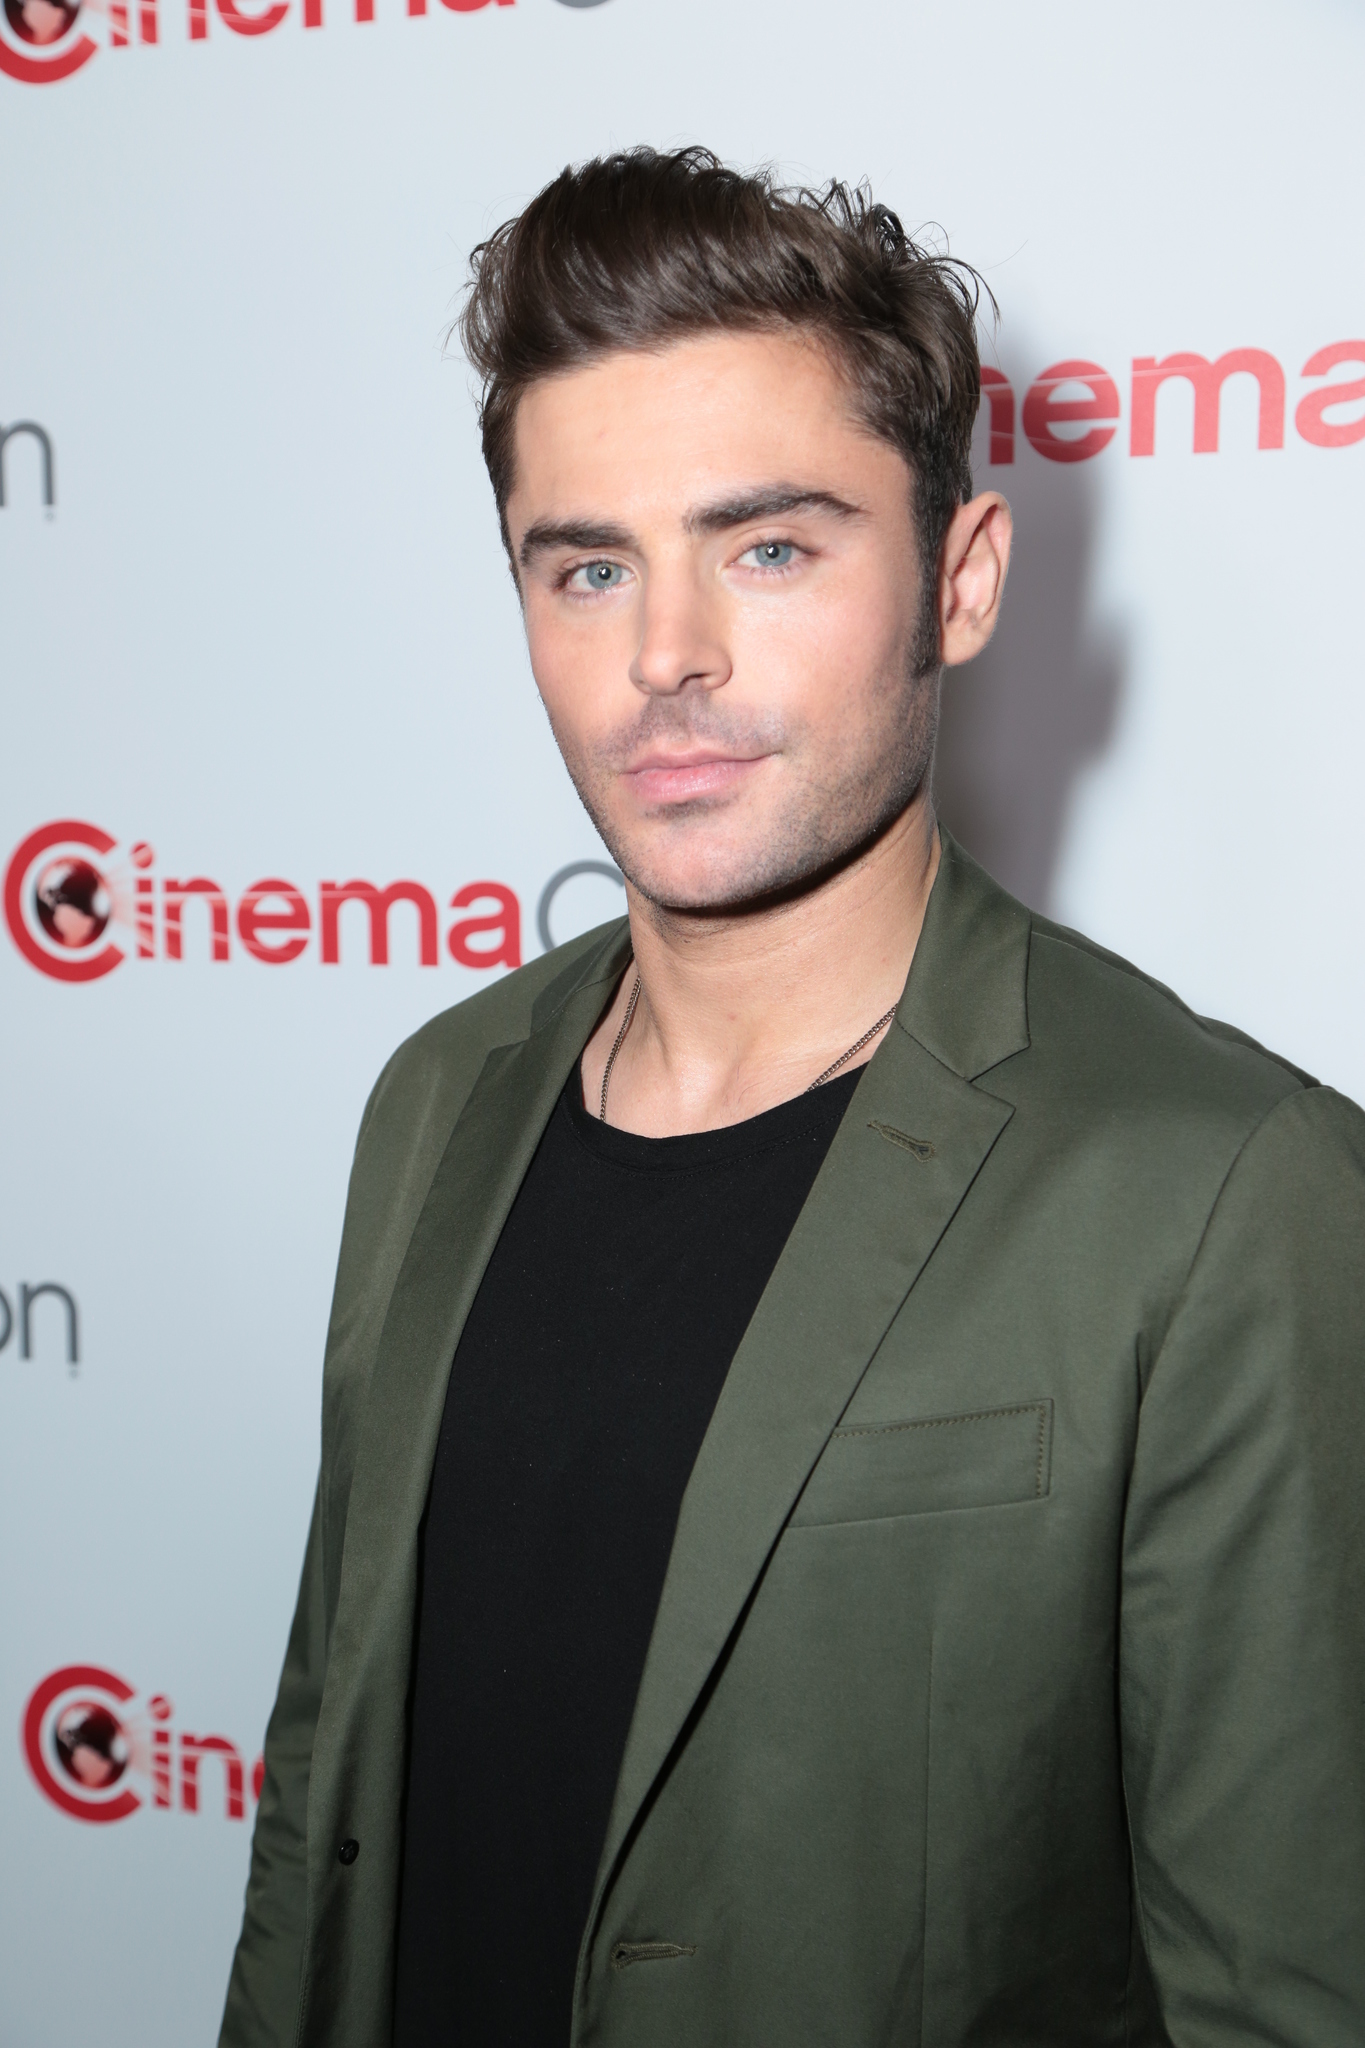 taille-zac-efron-Image